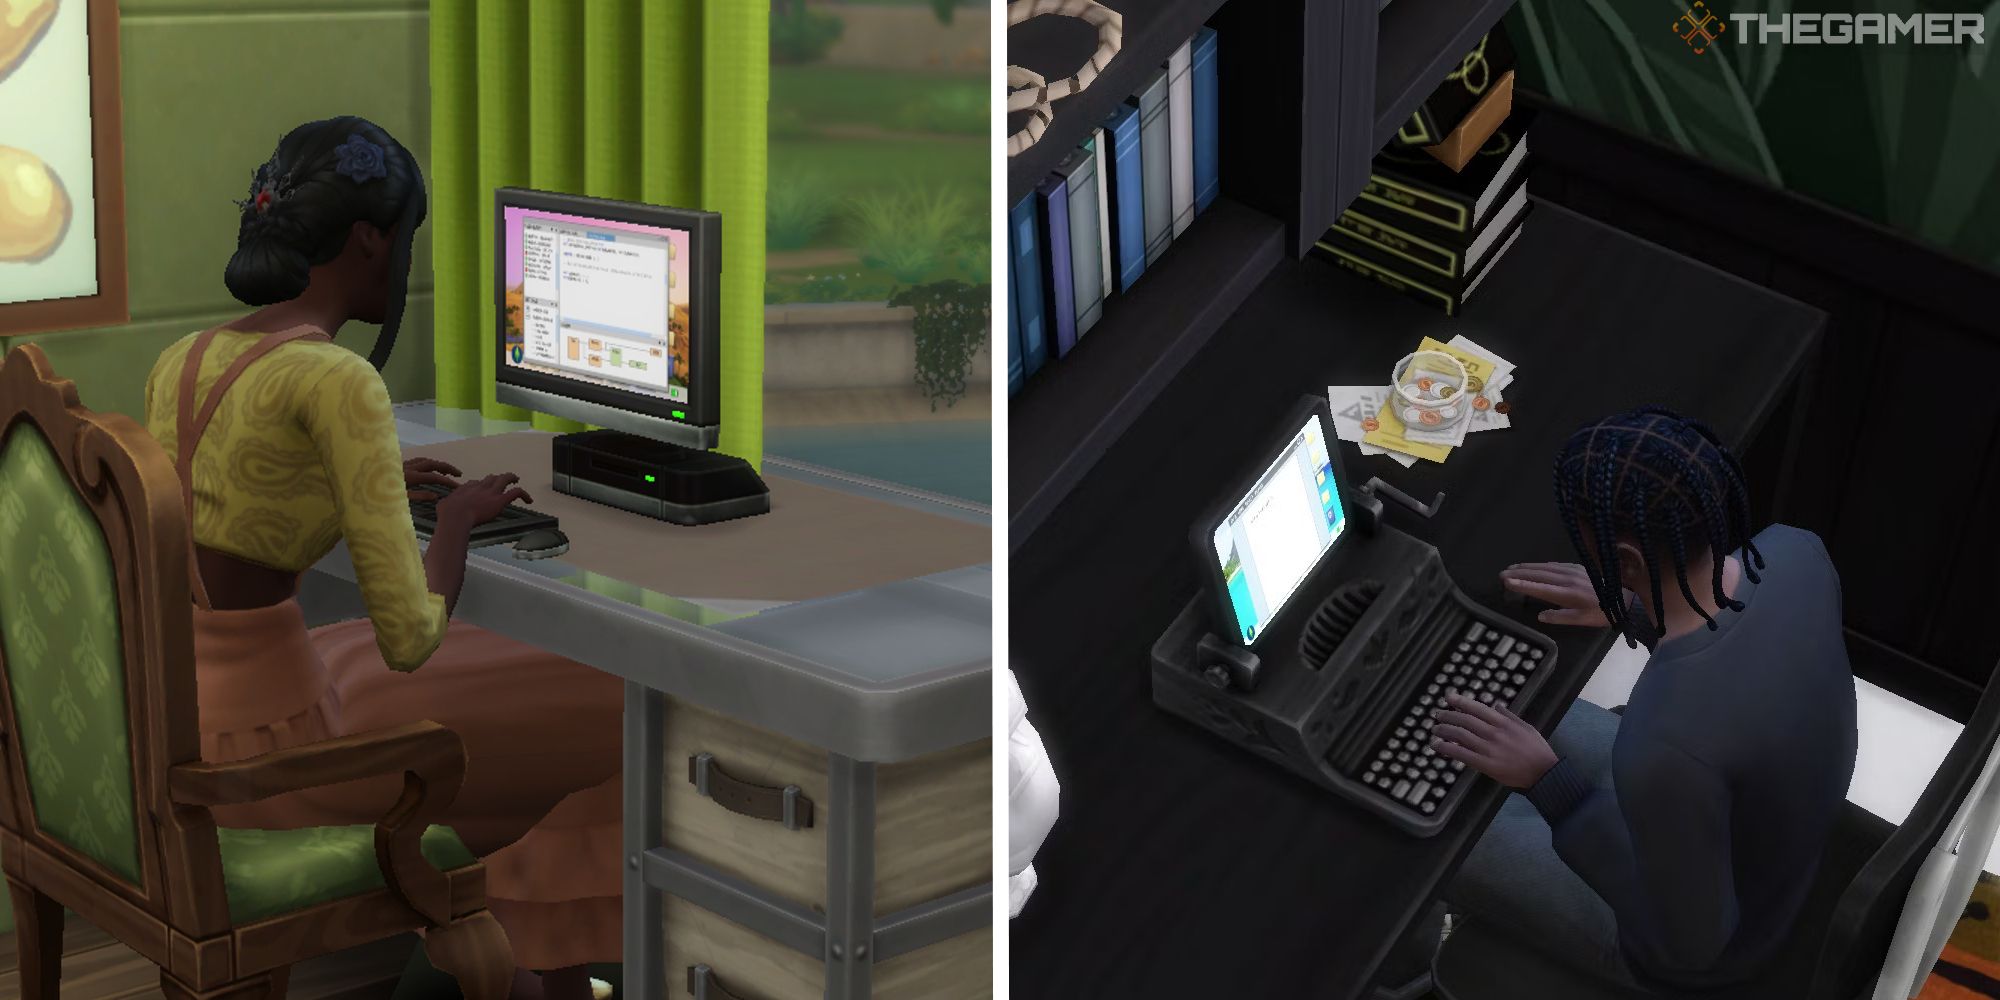 sims 4 split image showing two sims at comptuers